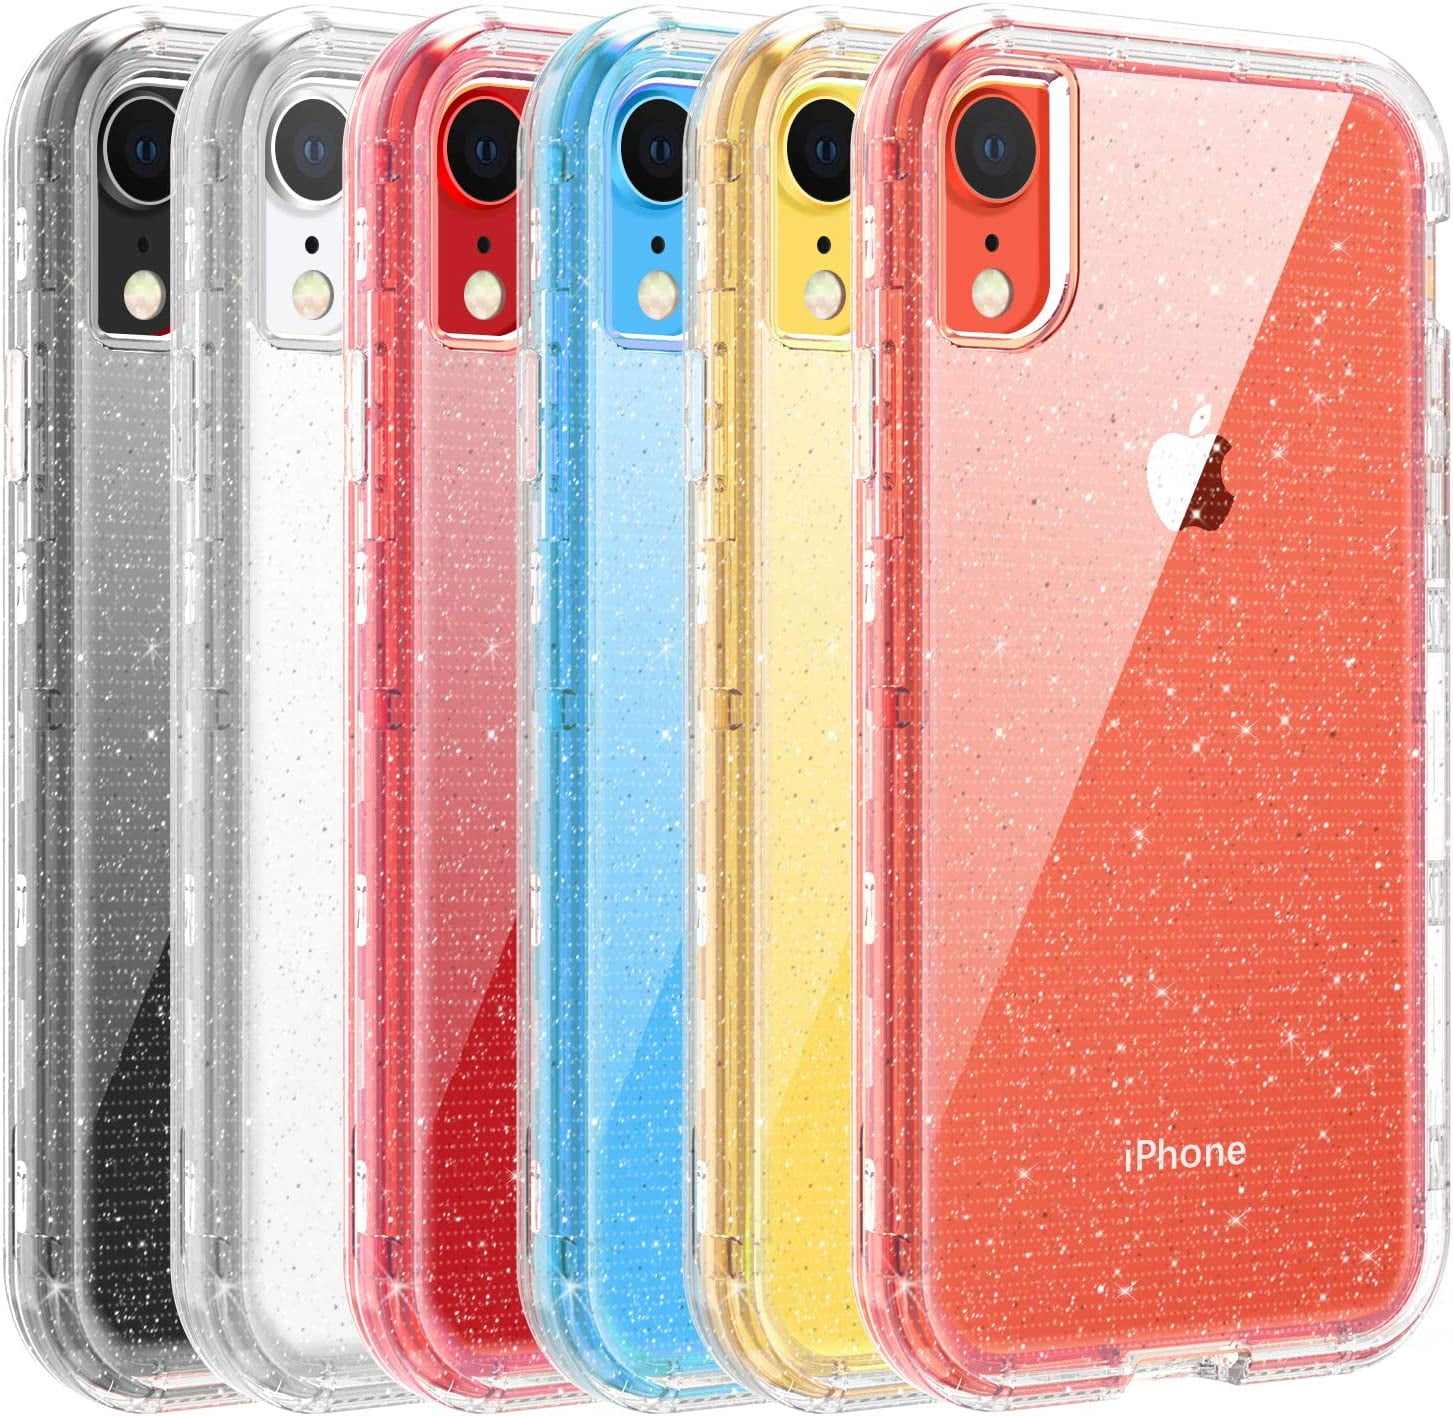 ULAK iPhone XR Case, Stylish Heavy Duty Hybrid Hard PC Back Cover and Front  Bumper Frame Phone Case for Apple iPhone XR 6.1 inch for Women Men Girls